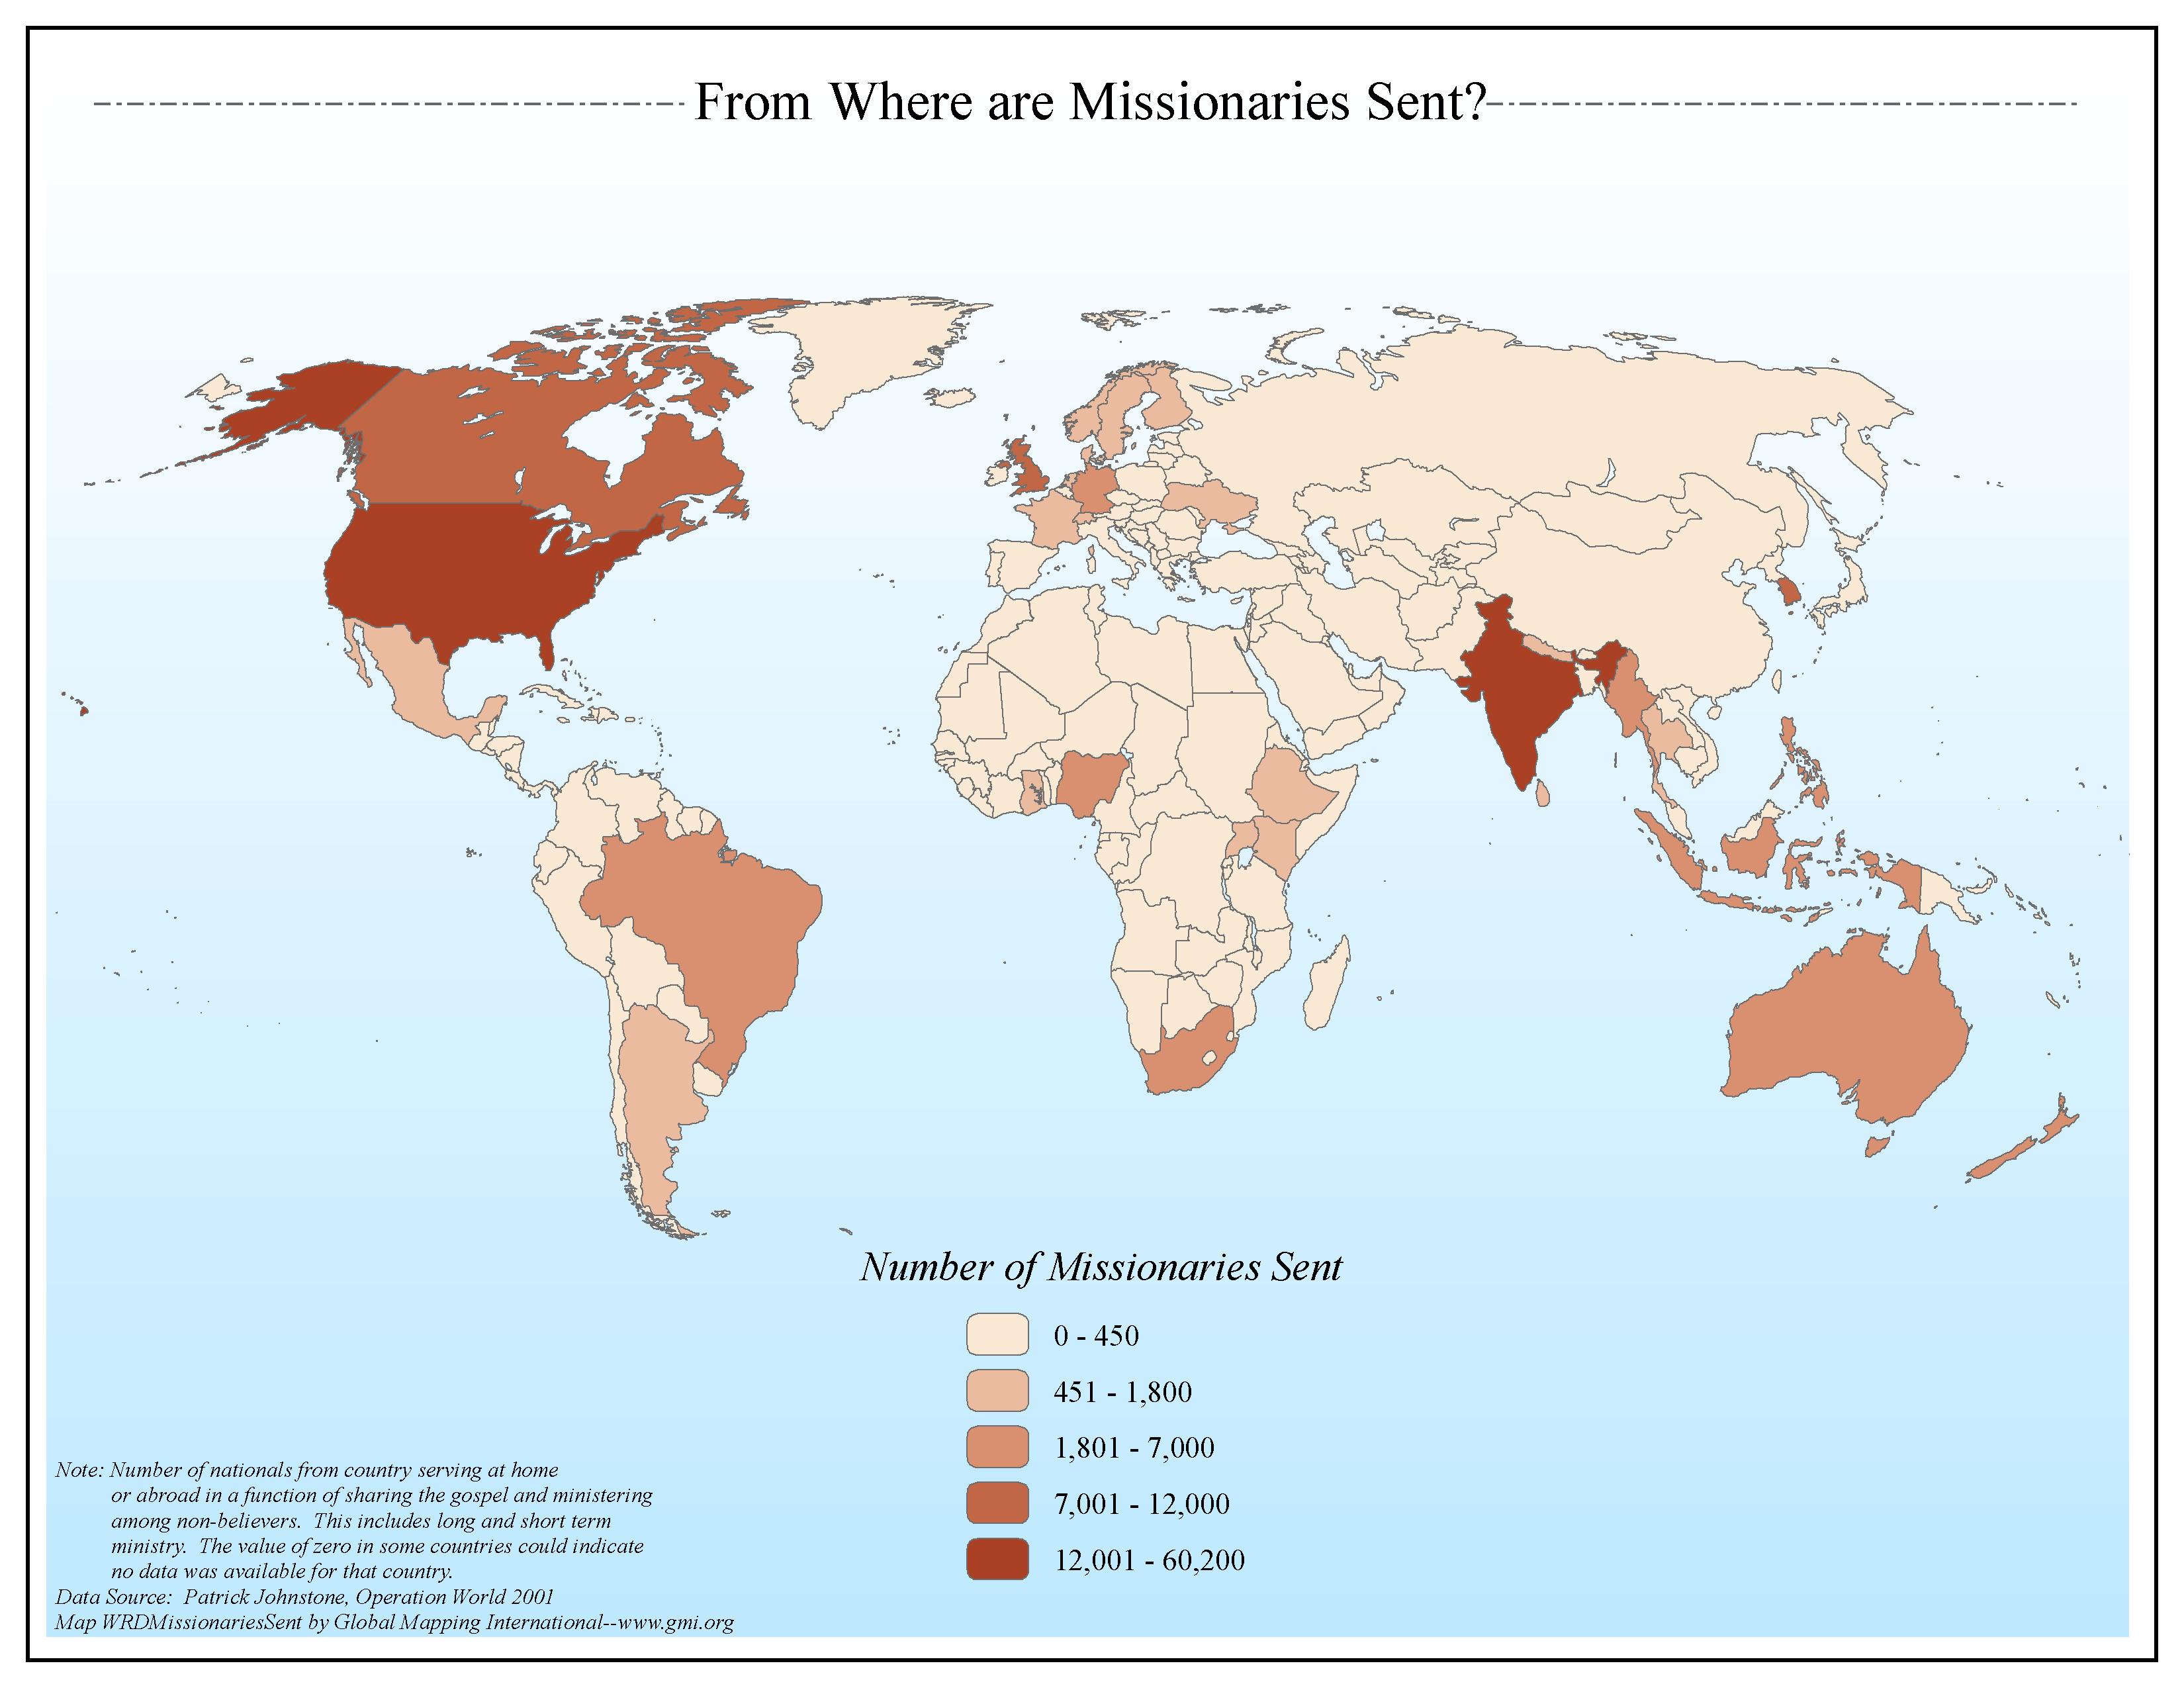 From Where are Missionaries Sent?